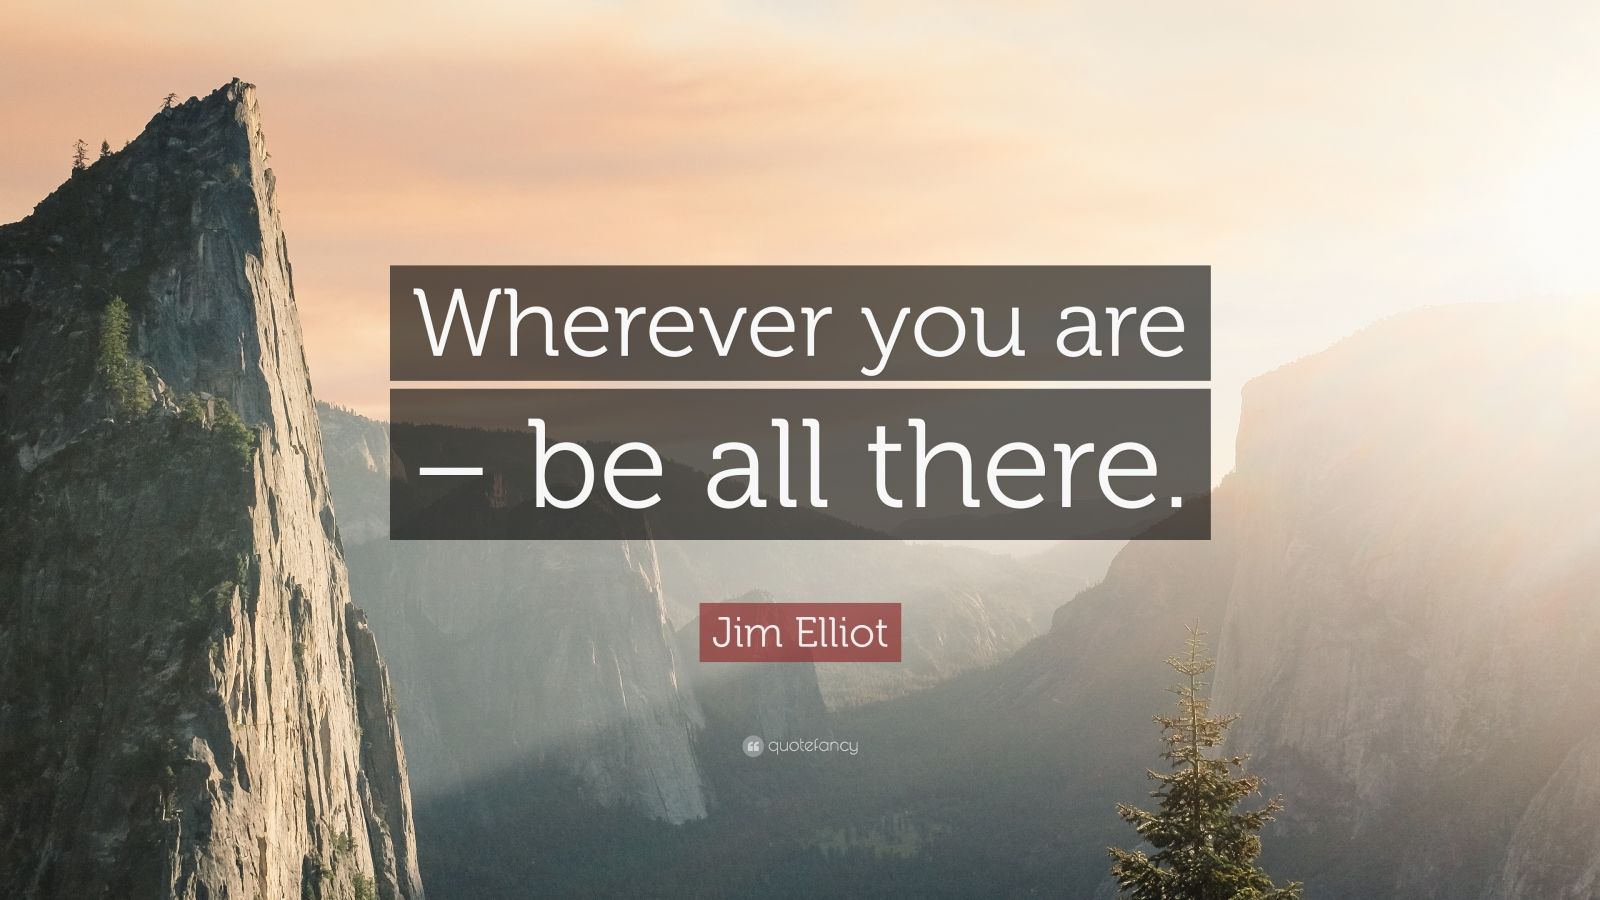 Jim Elliot Quote: "Wherever you are - be all there." (9 wallpapers) - Quotefancy